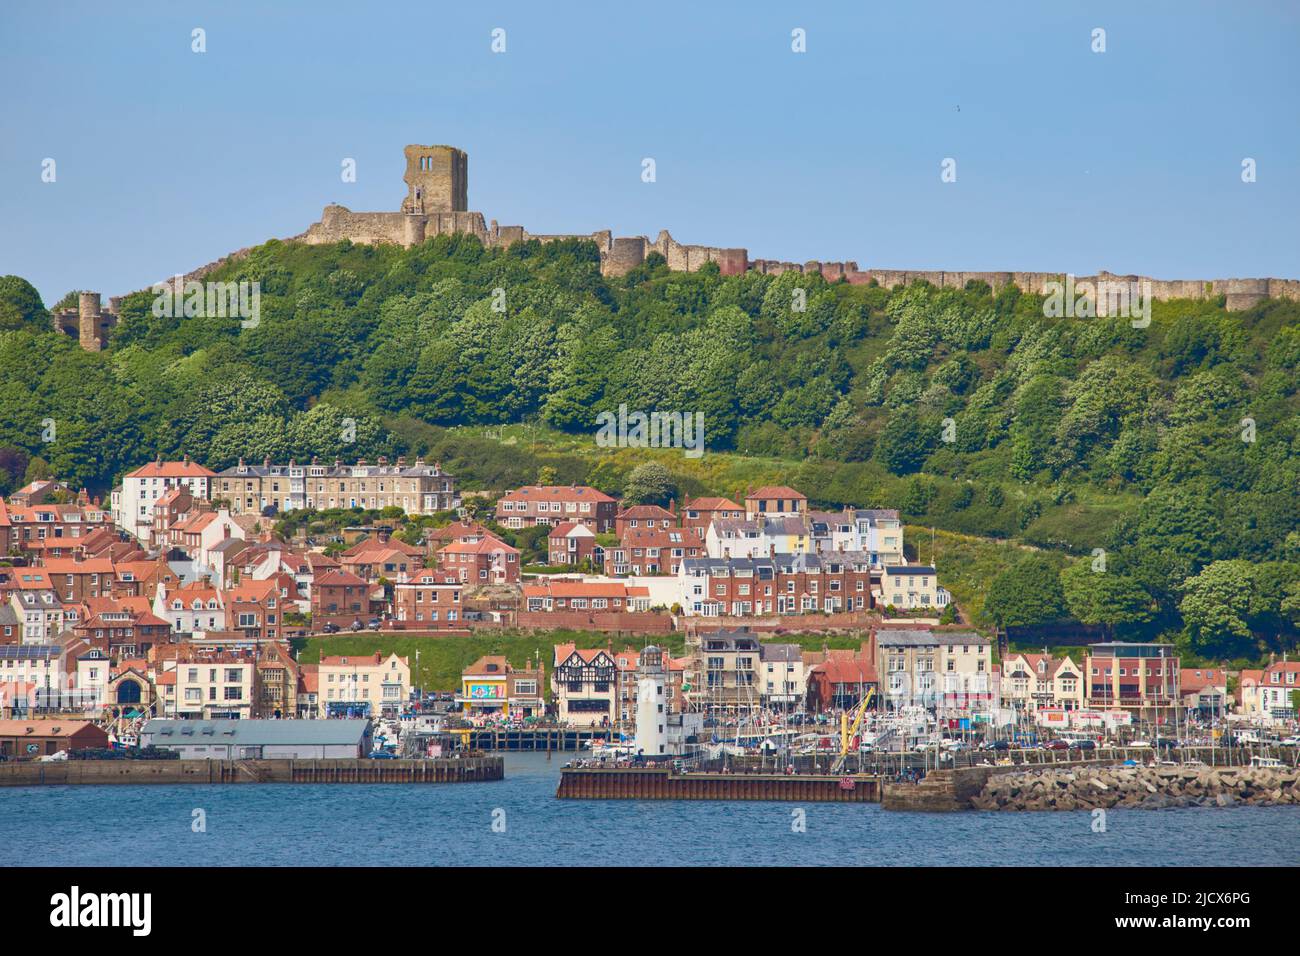 View of South Bay looking towards harbour and Scarborough Castle, Scarborough, Yorkshire, England, United Kingdom, Europe Stock Photo